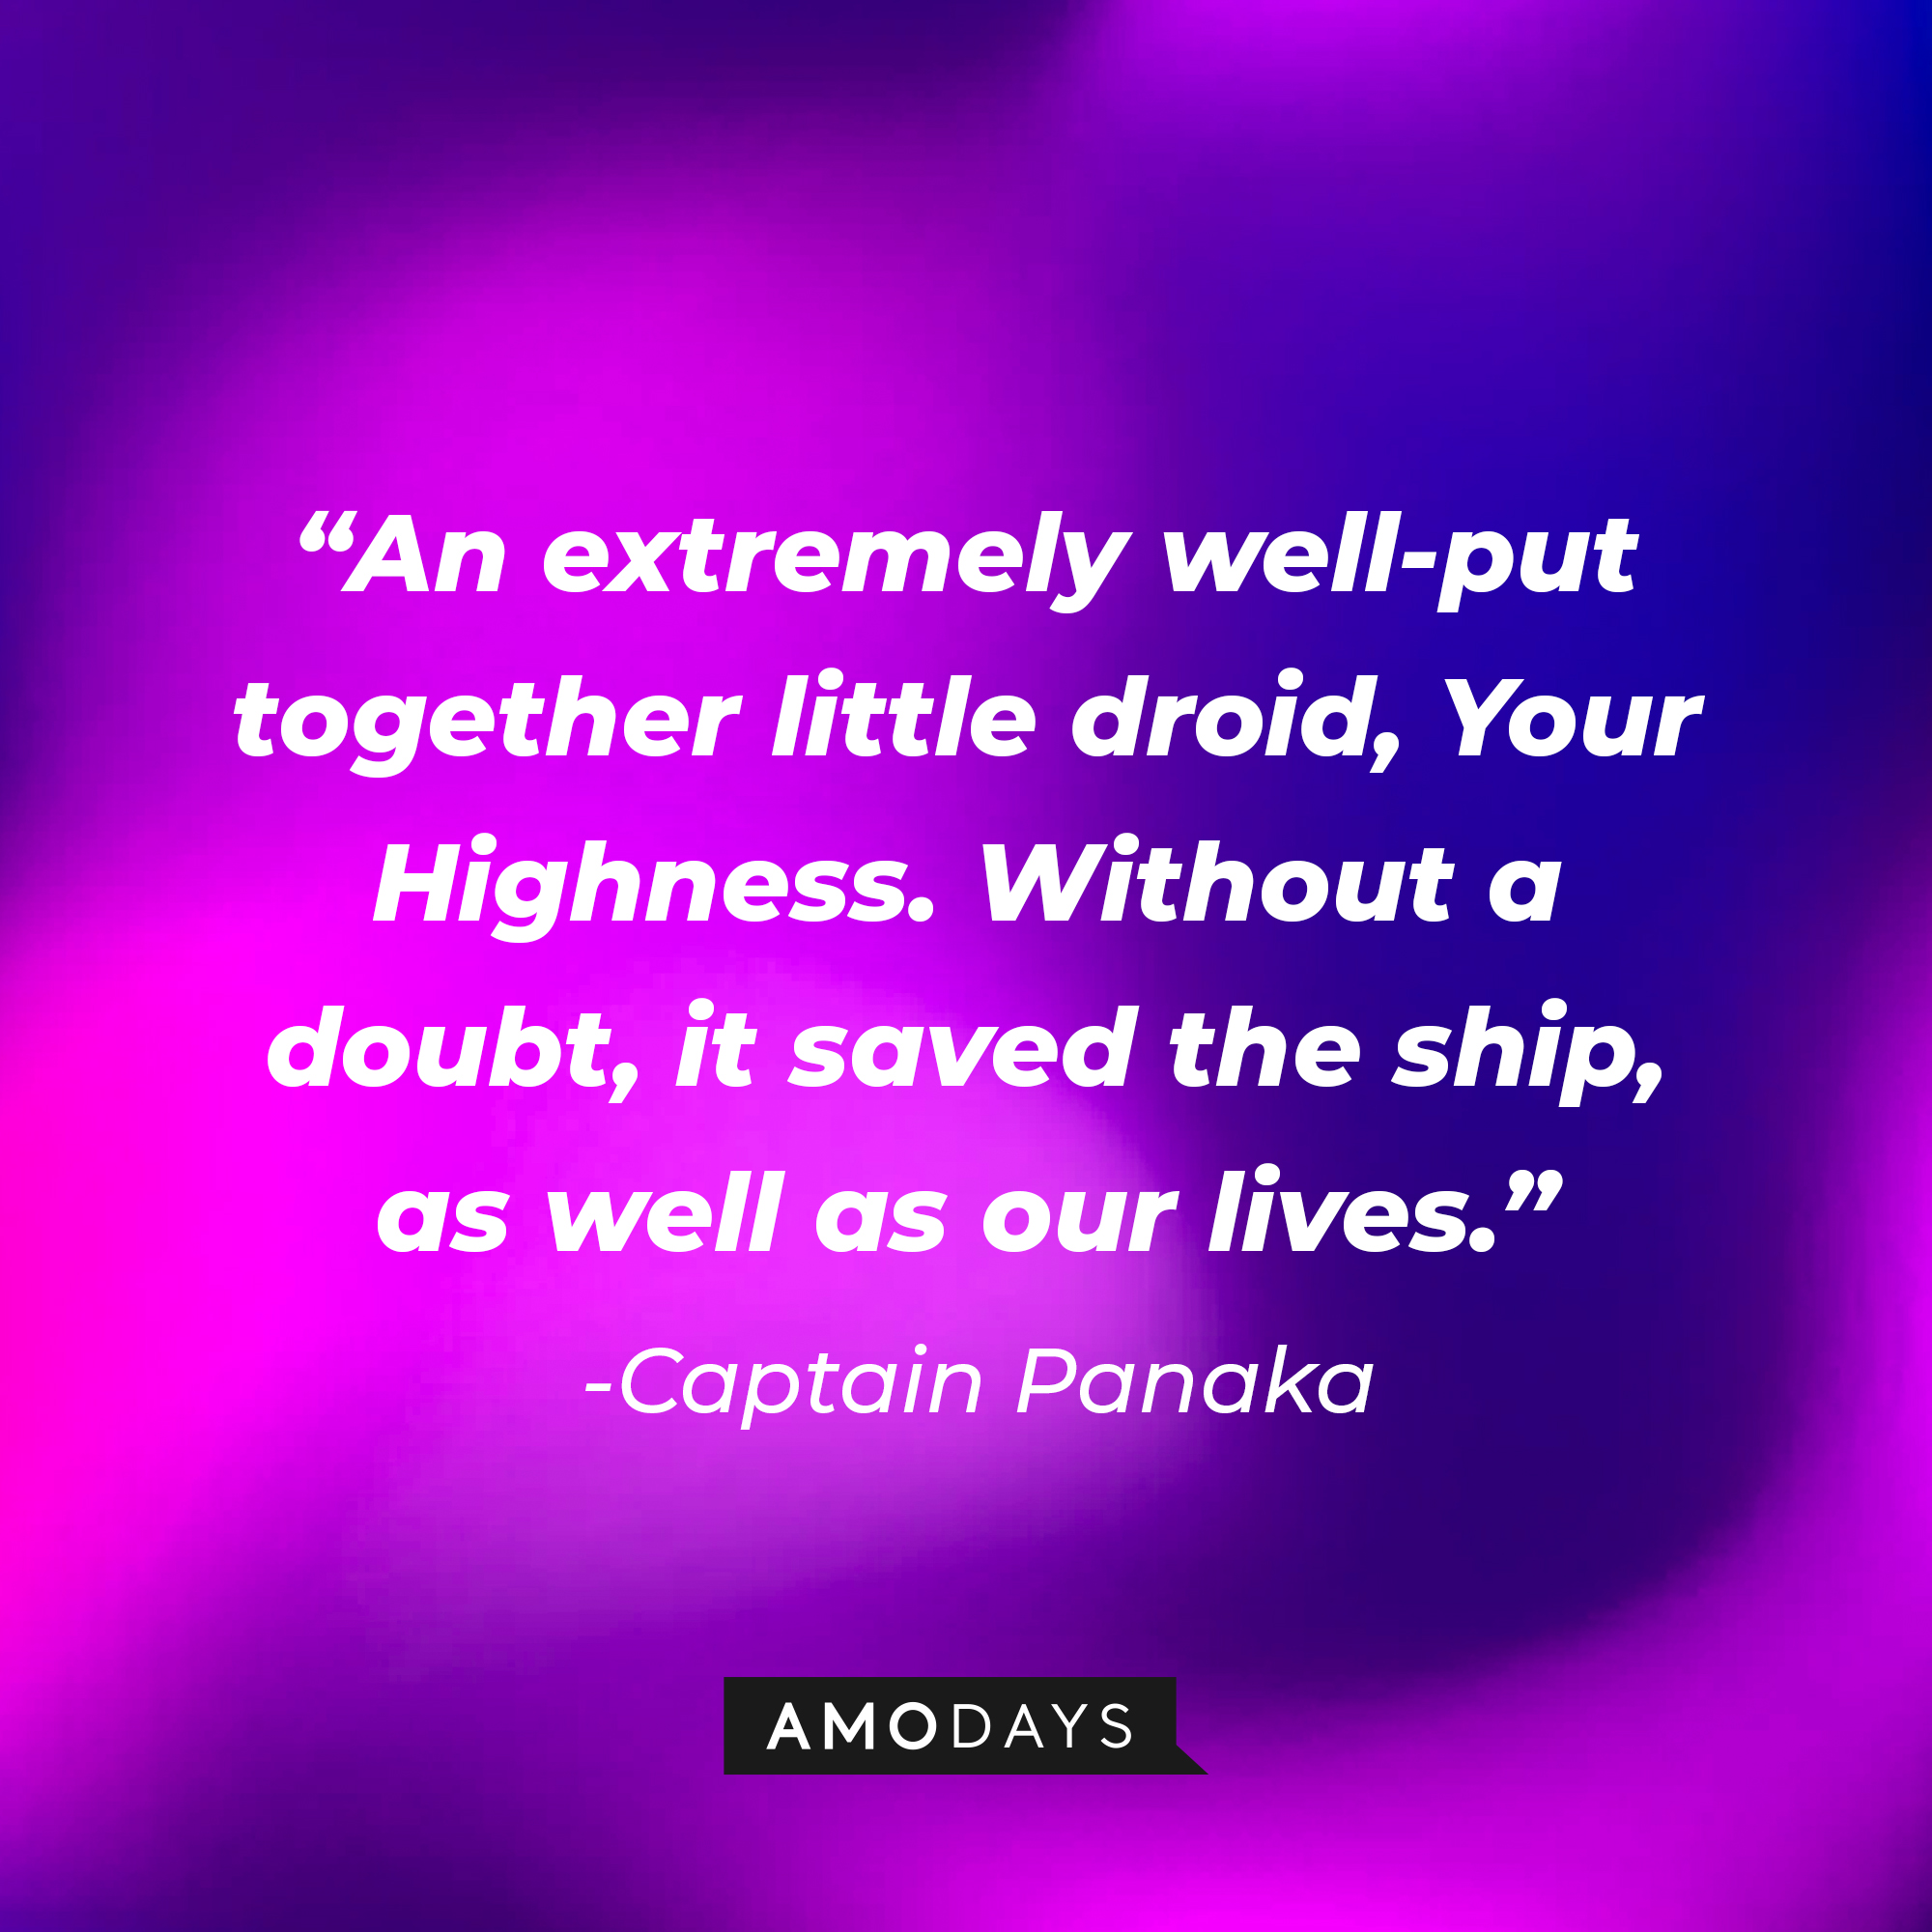 Captain Panaka's quote: "An extremely well-put together little droid, Your Highness. Without a doubt, it saved the ship, as well as our lives." | Source: AmoDays